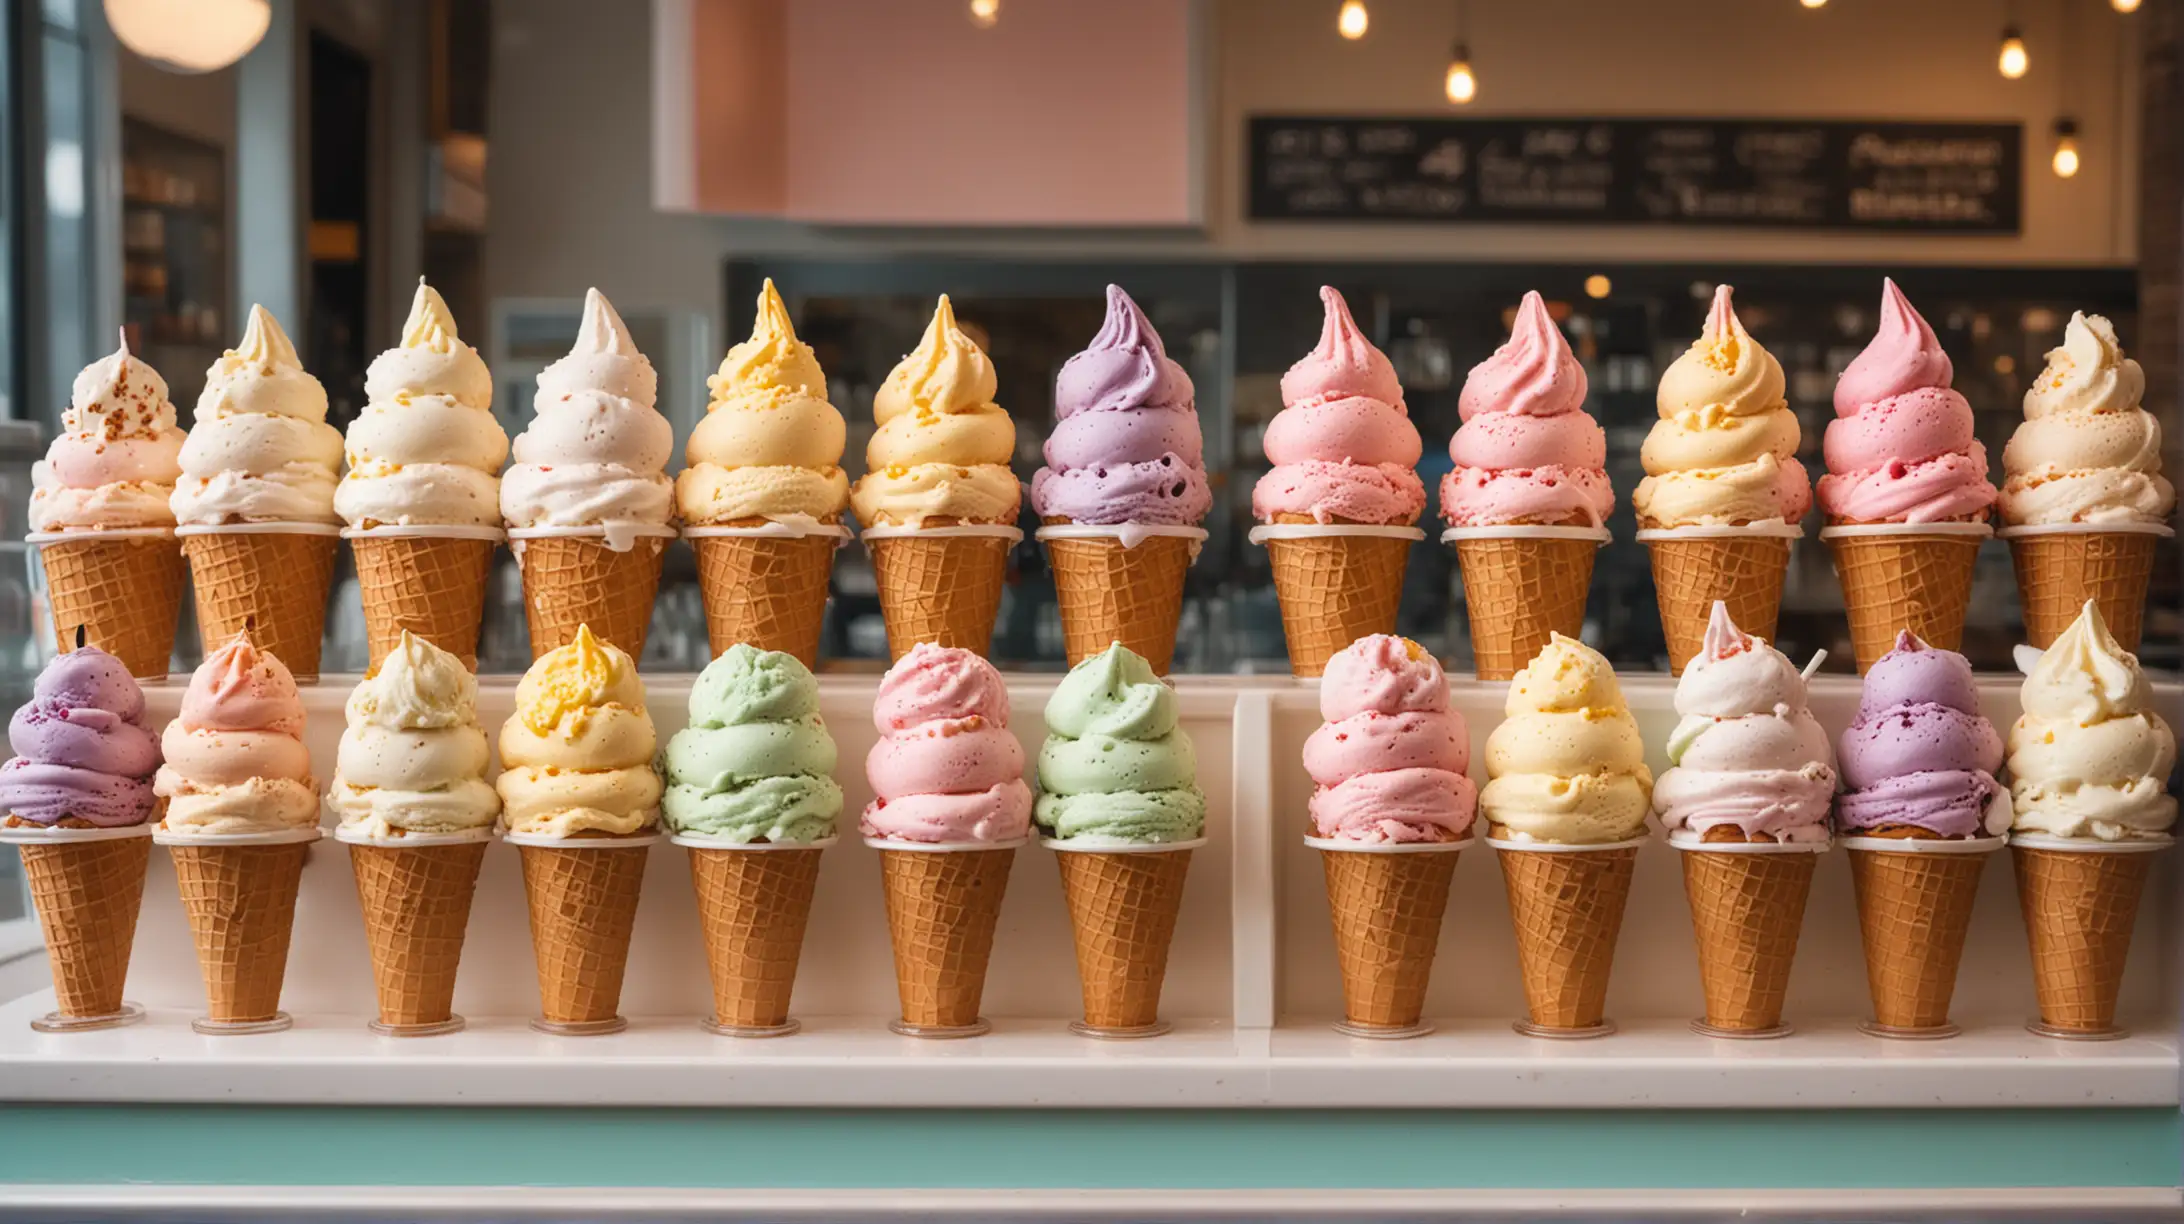 Colorful Ice Cream Parlor with a Variety of Flavors